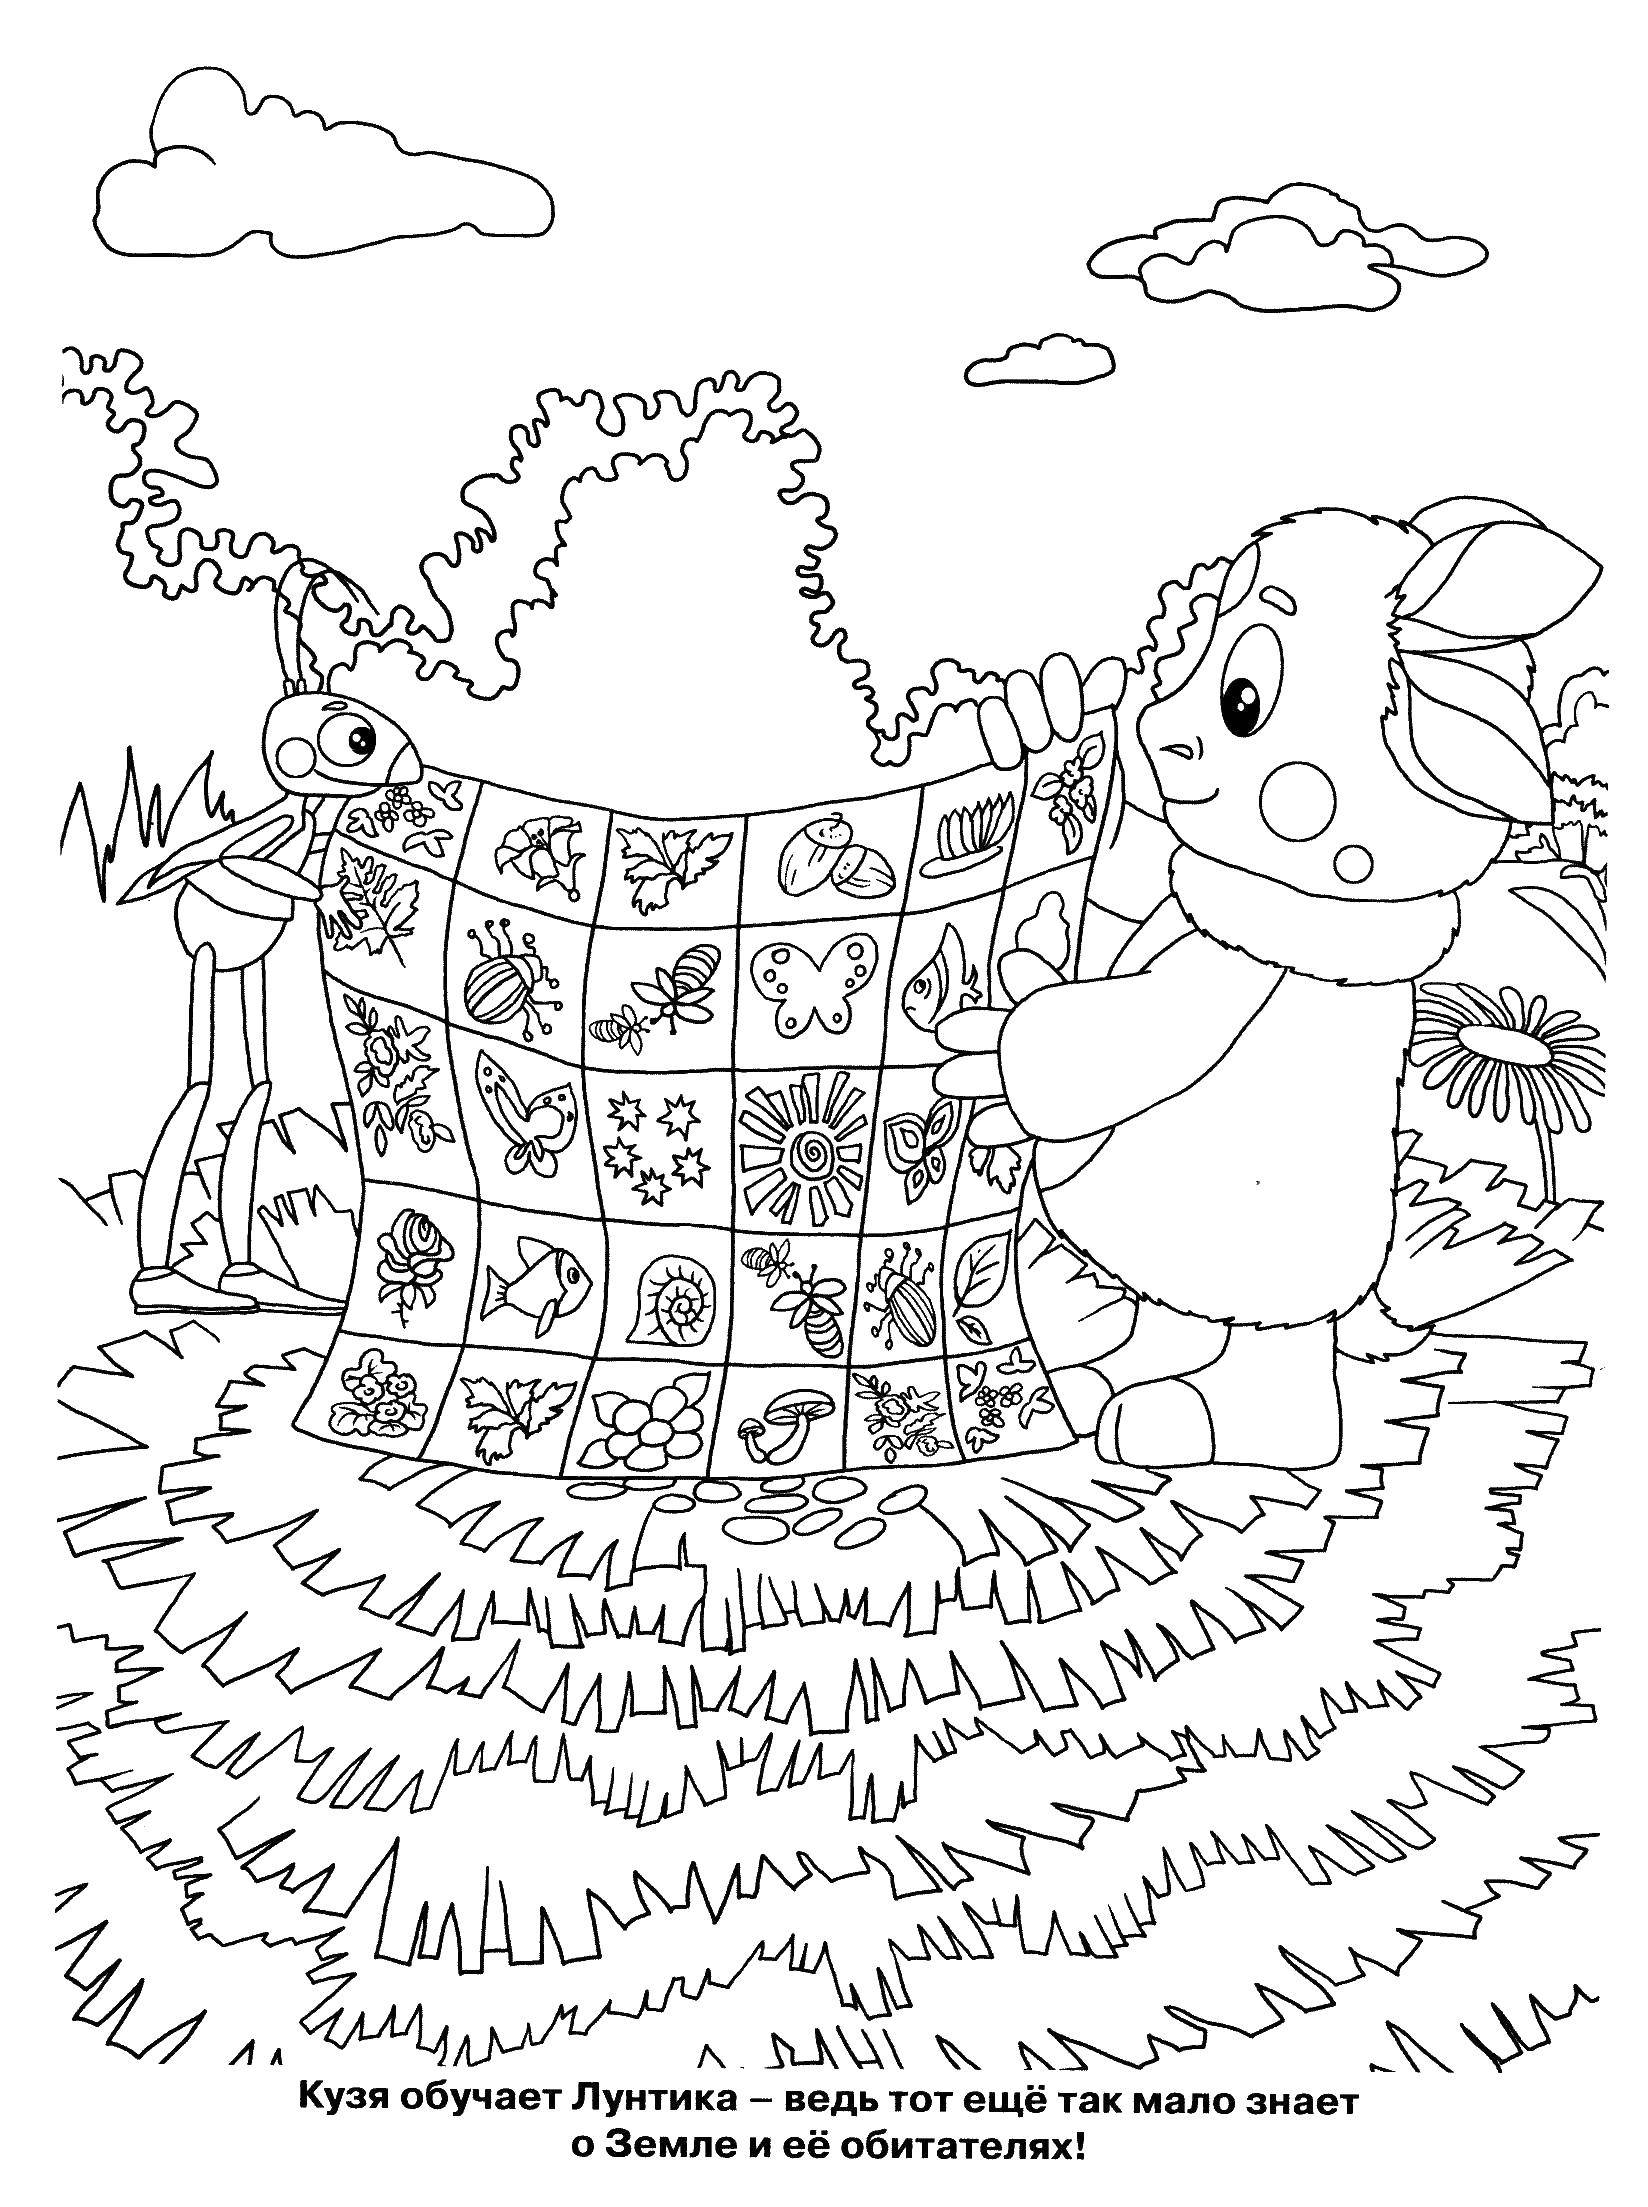 Coloring Kuzma Luntik teaches. Category The game and have fun. Tags:  Lunatic, Pretty, Kuzma.